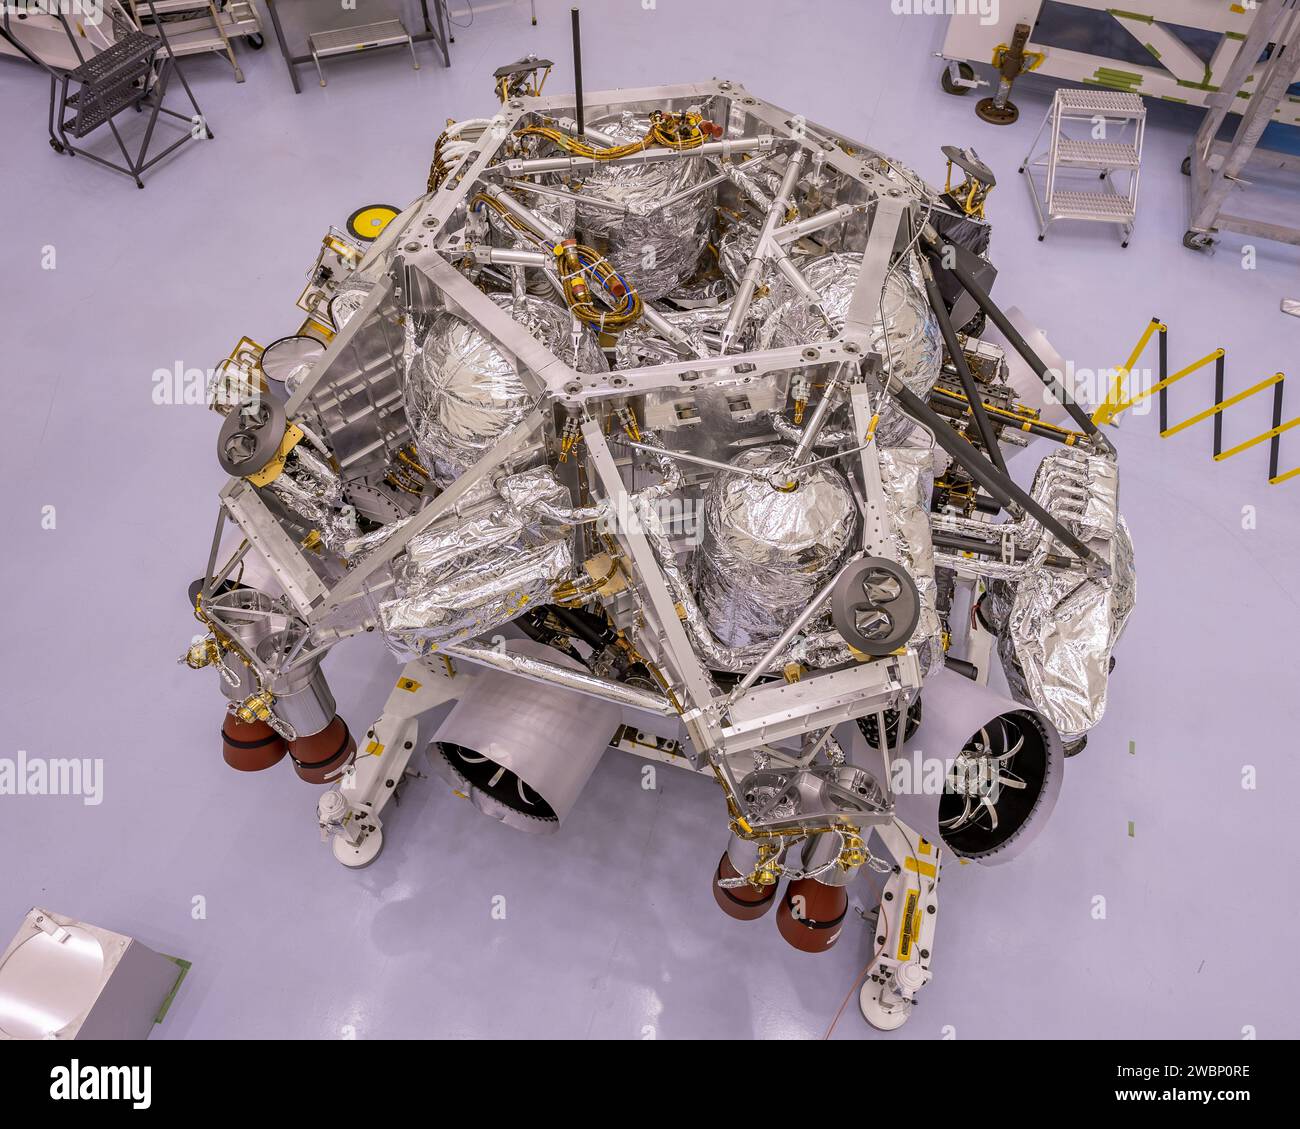 The powered descent vehicle for the Mars Perseverance rover is stacked inside the Payload Hazardous Servicing Facility at NASA’s Kennedy Space Center in Florida on April 28, 2020. The rover and descent stage were the first spacecraft components to come together for launch — and they will be the last to separate when the spacecraft reaches Mars on Feb. 18, 2021. Launch, aboard a United Launch Alliance Atlas V 541 rocket, is targeted for summer 2020 from Cape Canaveral Air Force Station. NASA’s Launch Services Program based at Kennedy is managing the launch. Stock Photo